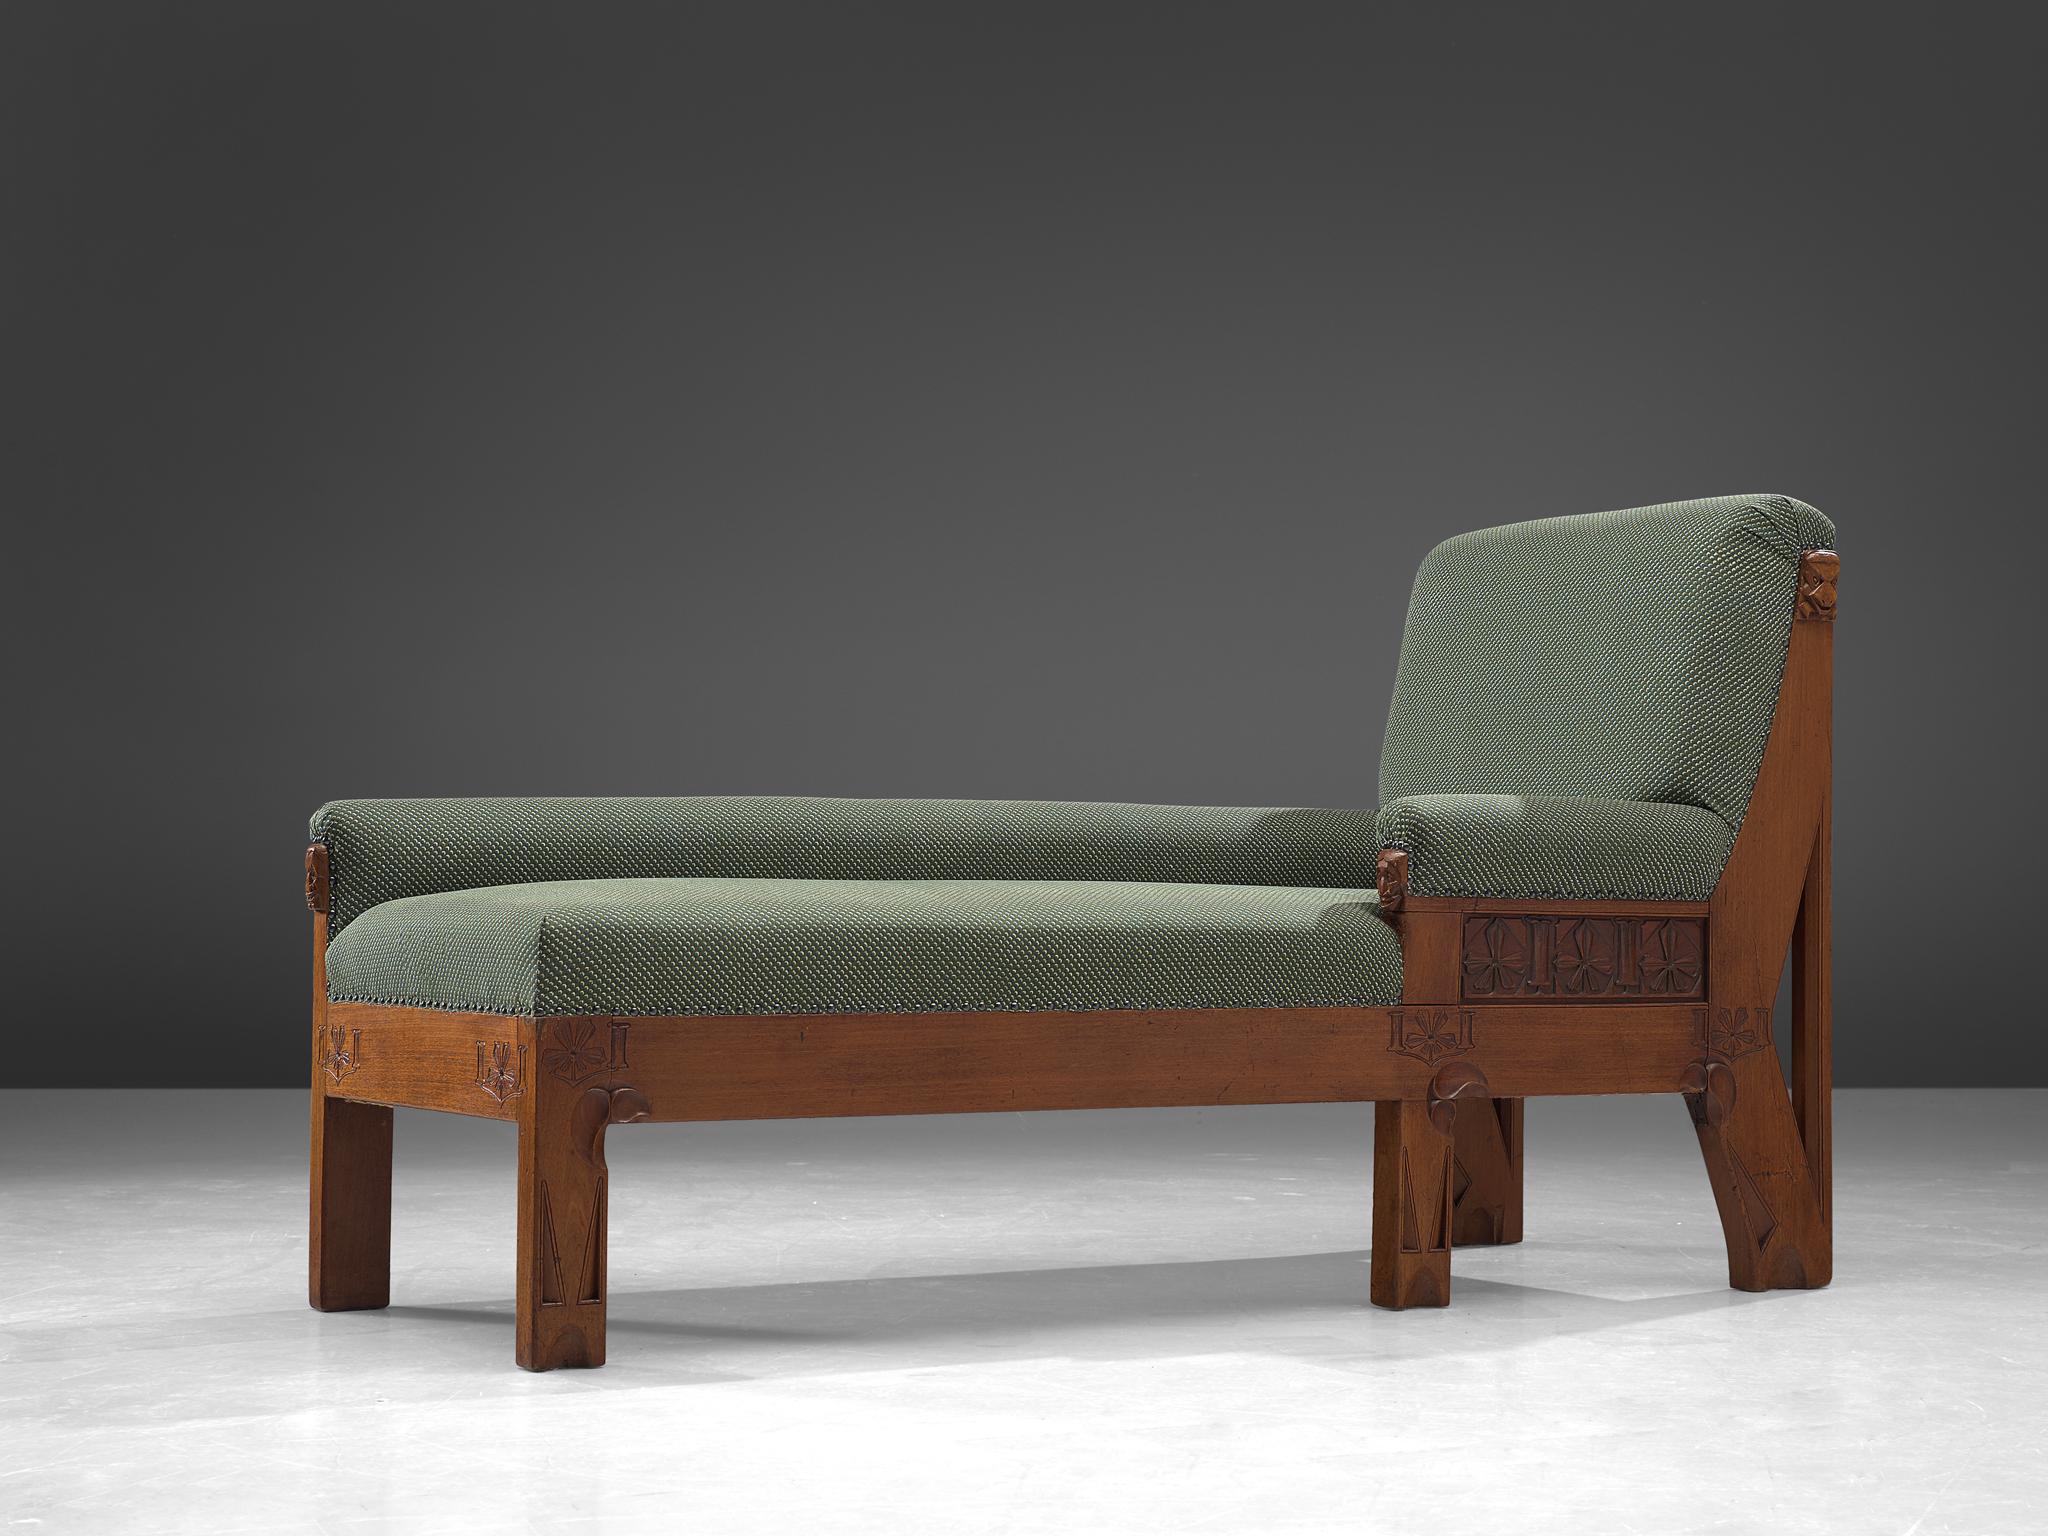 Art Deco Early Dutch Chaise Longue in ZAK+FOX 'Fantasma' Collection 2020 Upholstery